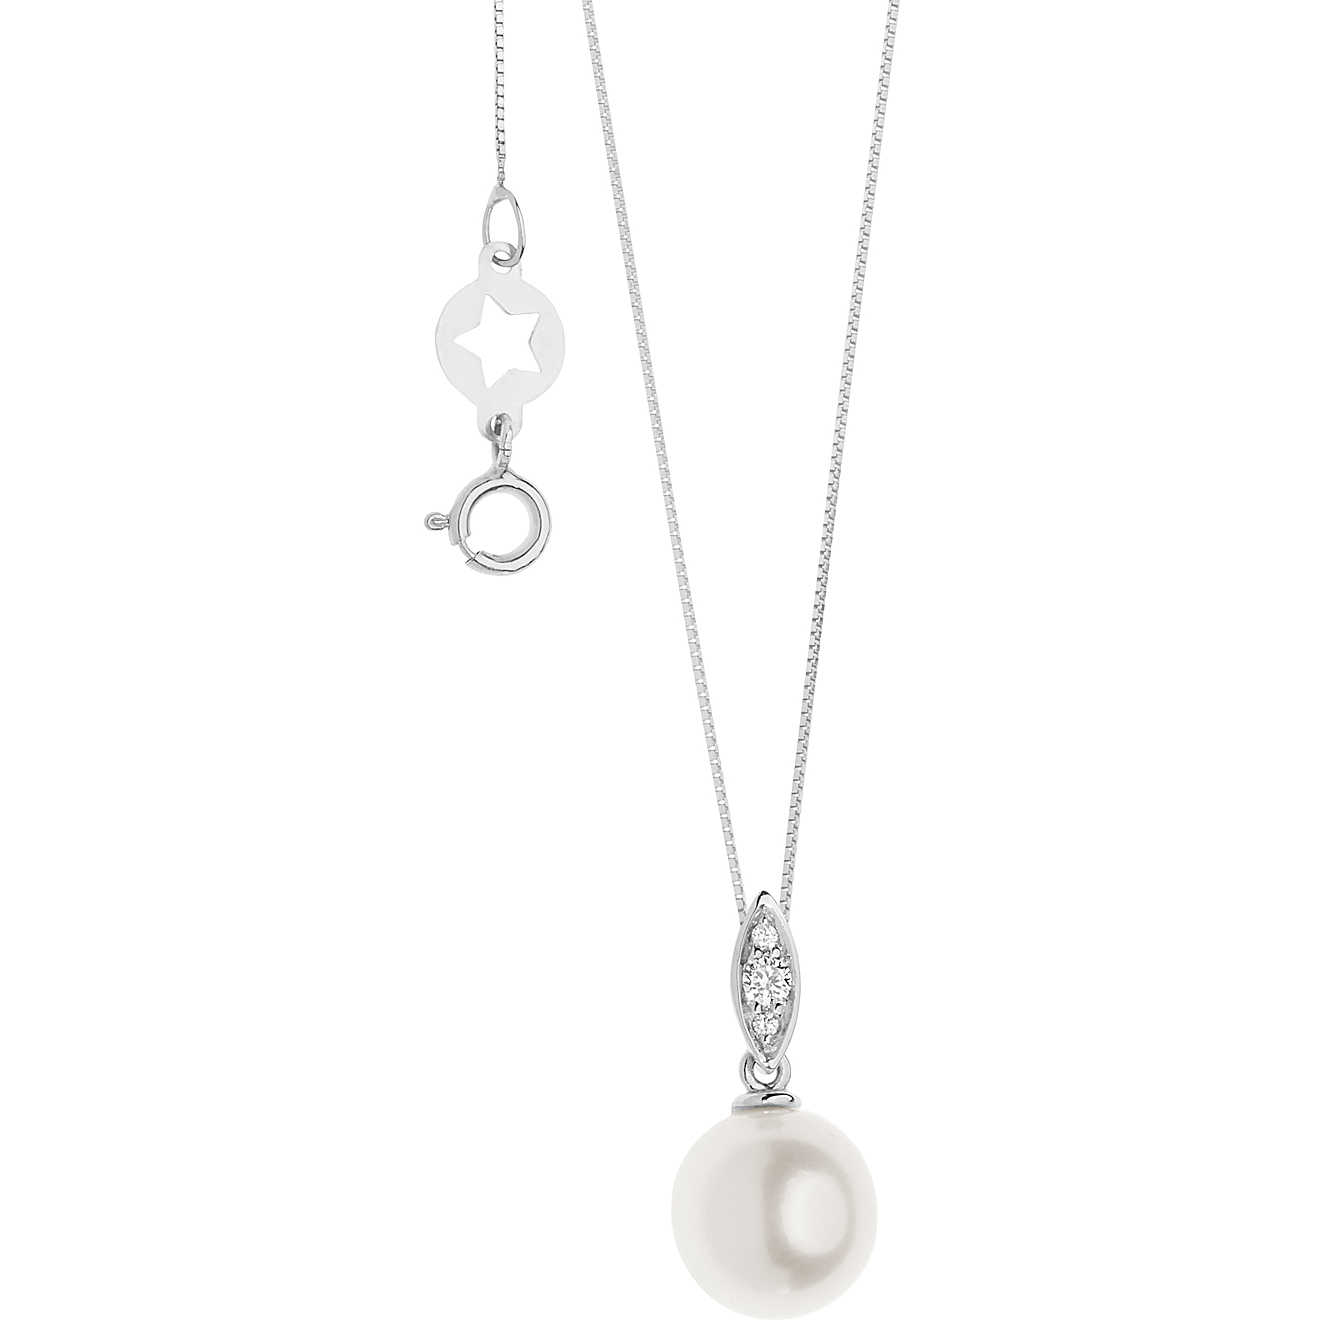 Women's Jewelry Necklace Comete Pearls D'Amore